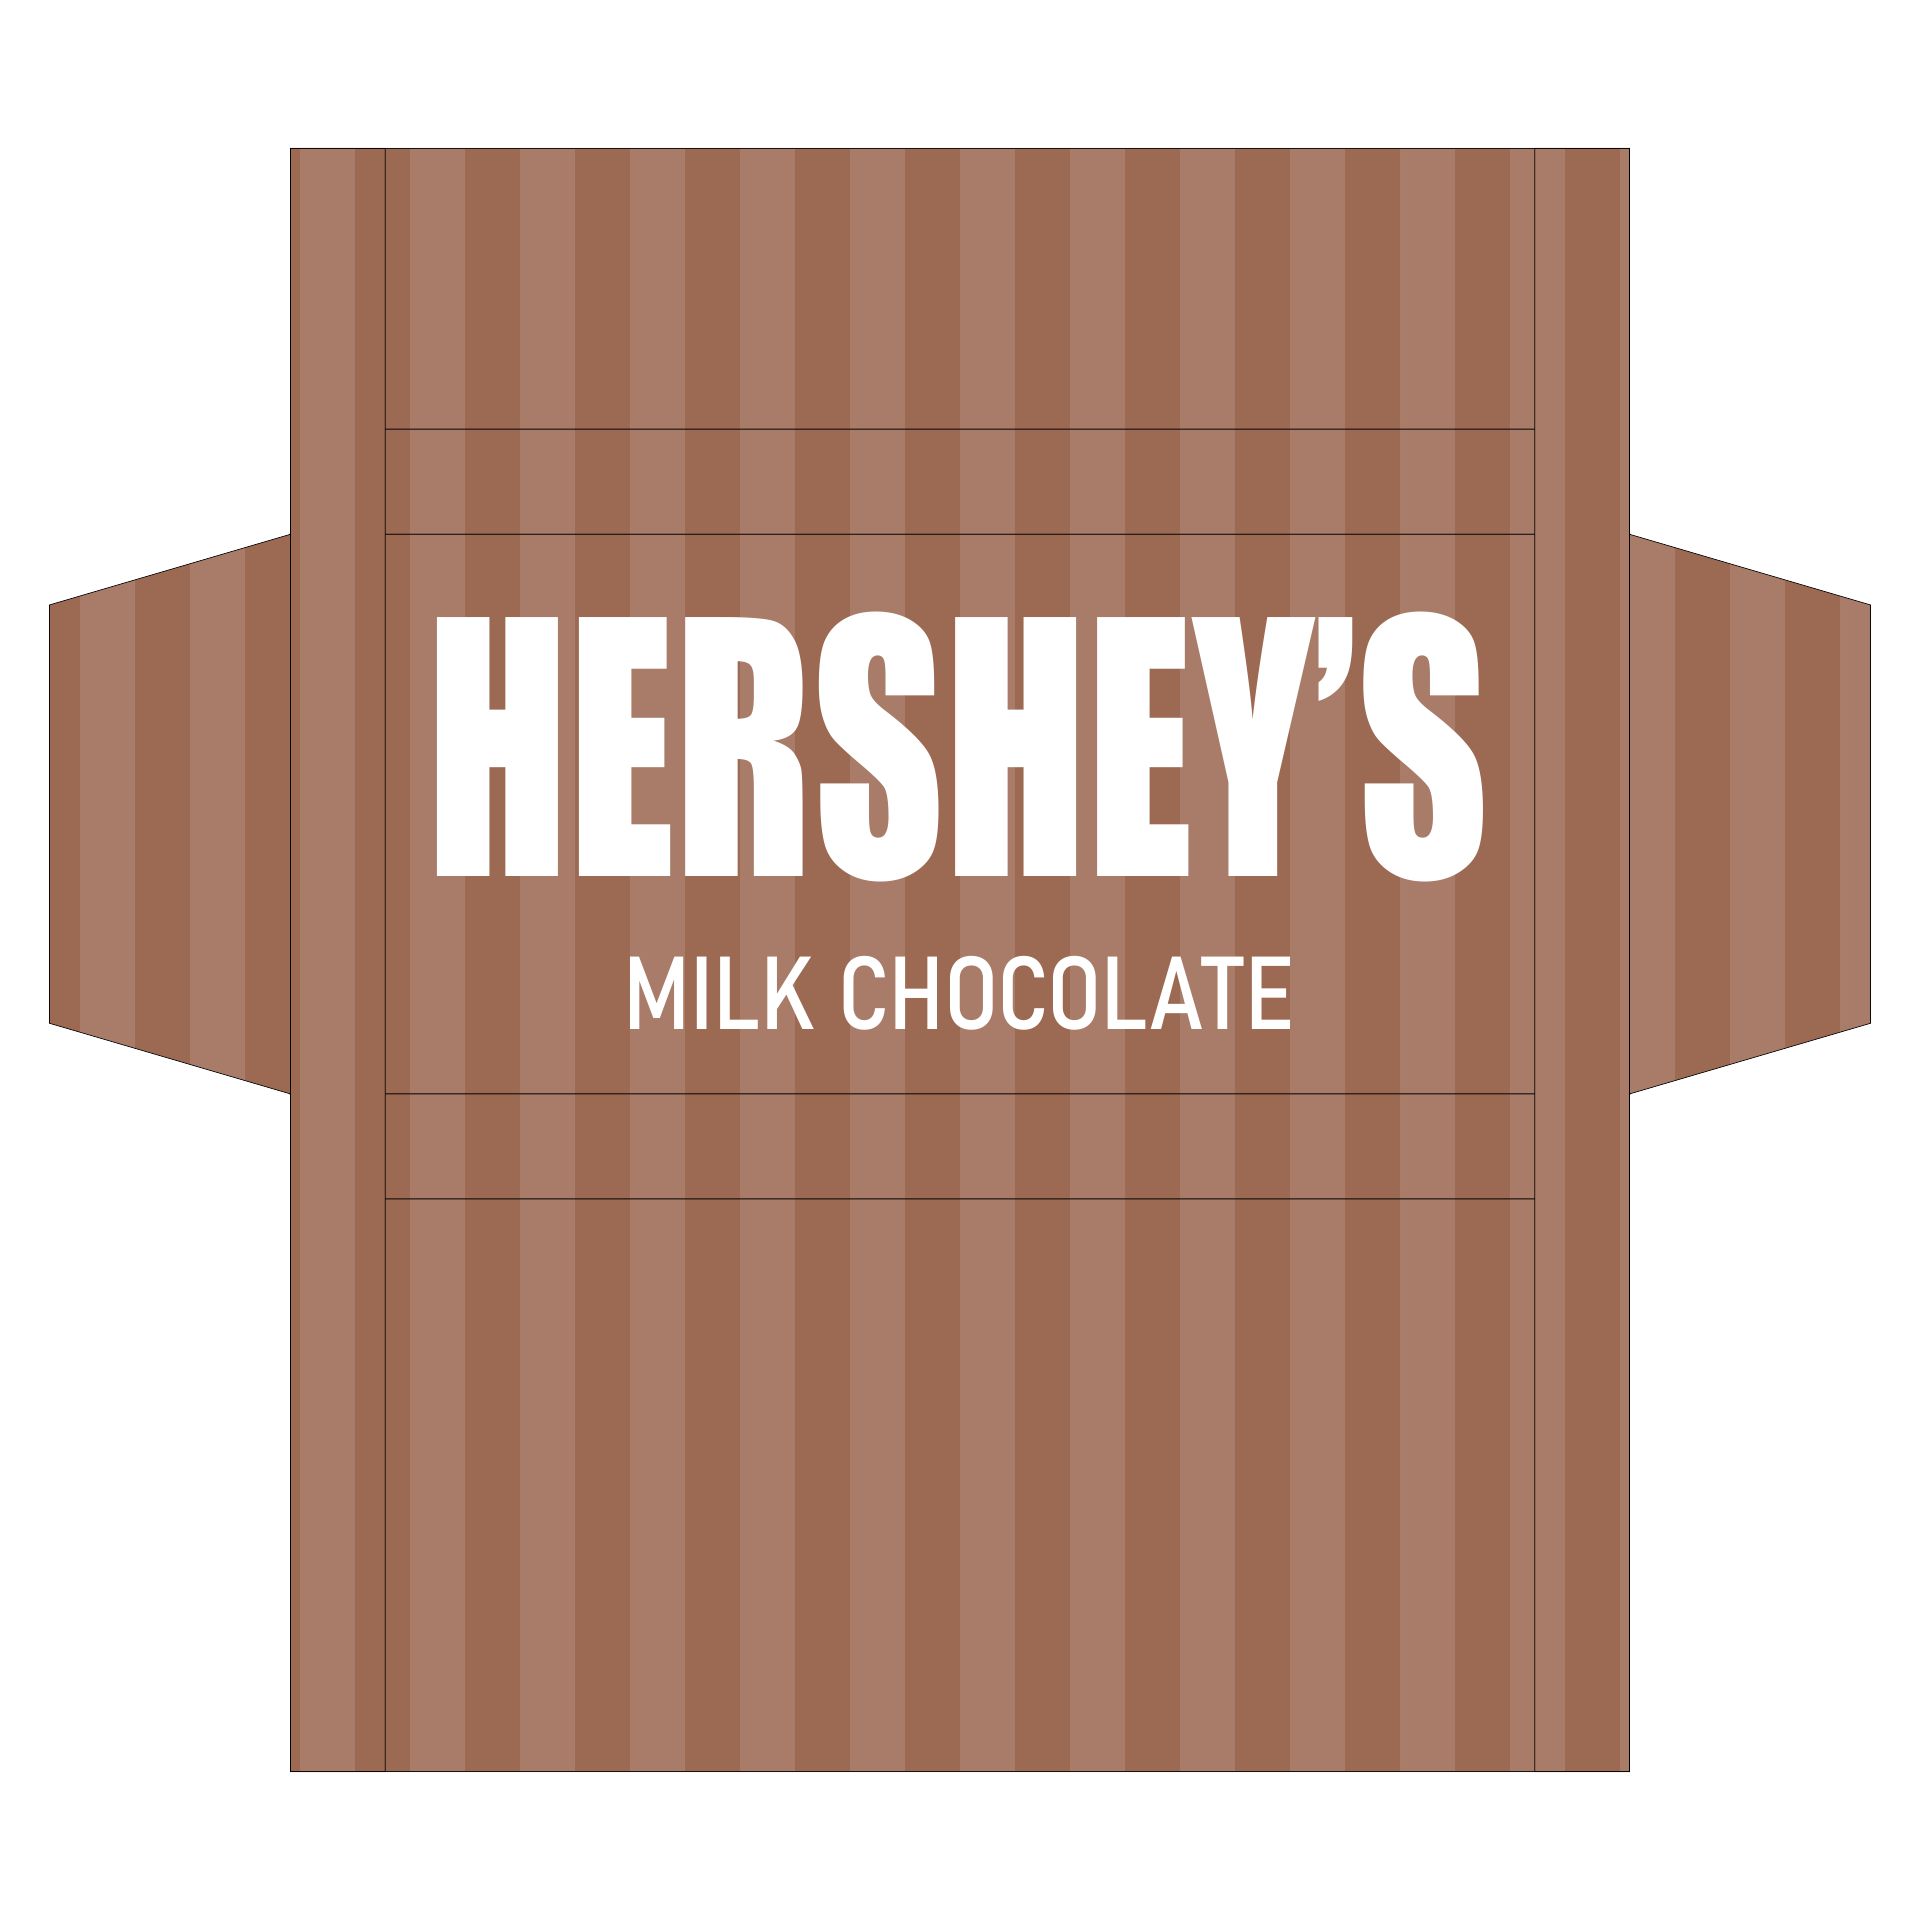 7 Best Images of Hershey Bus Printable Candy Bar Wrapper Template